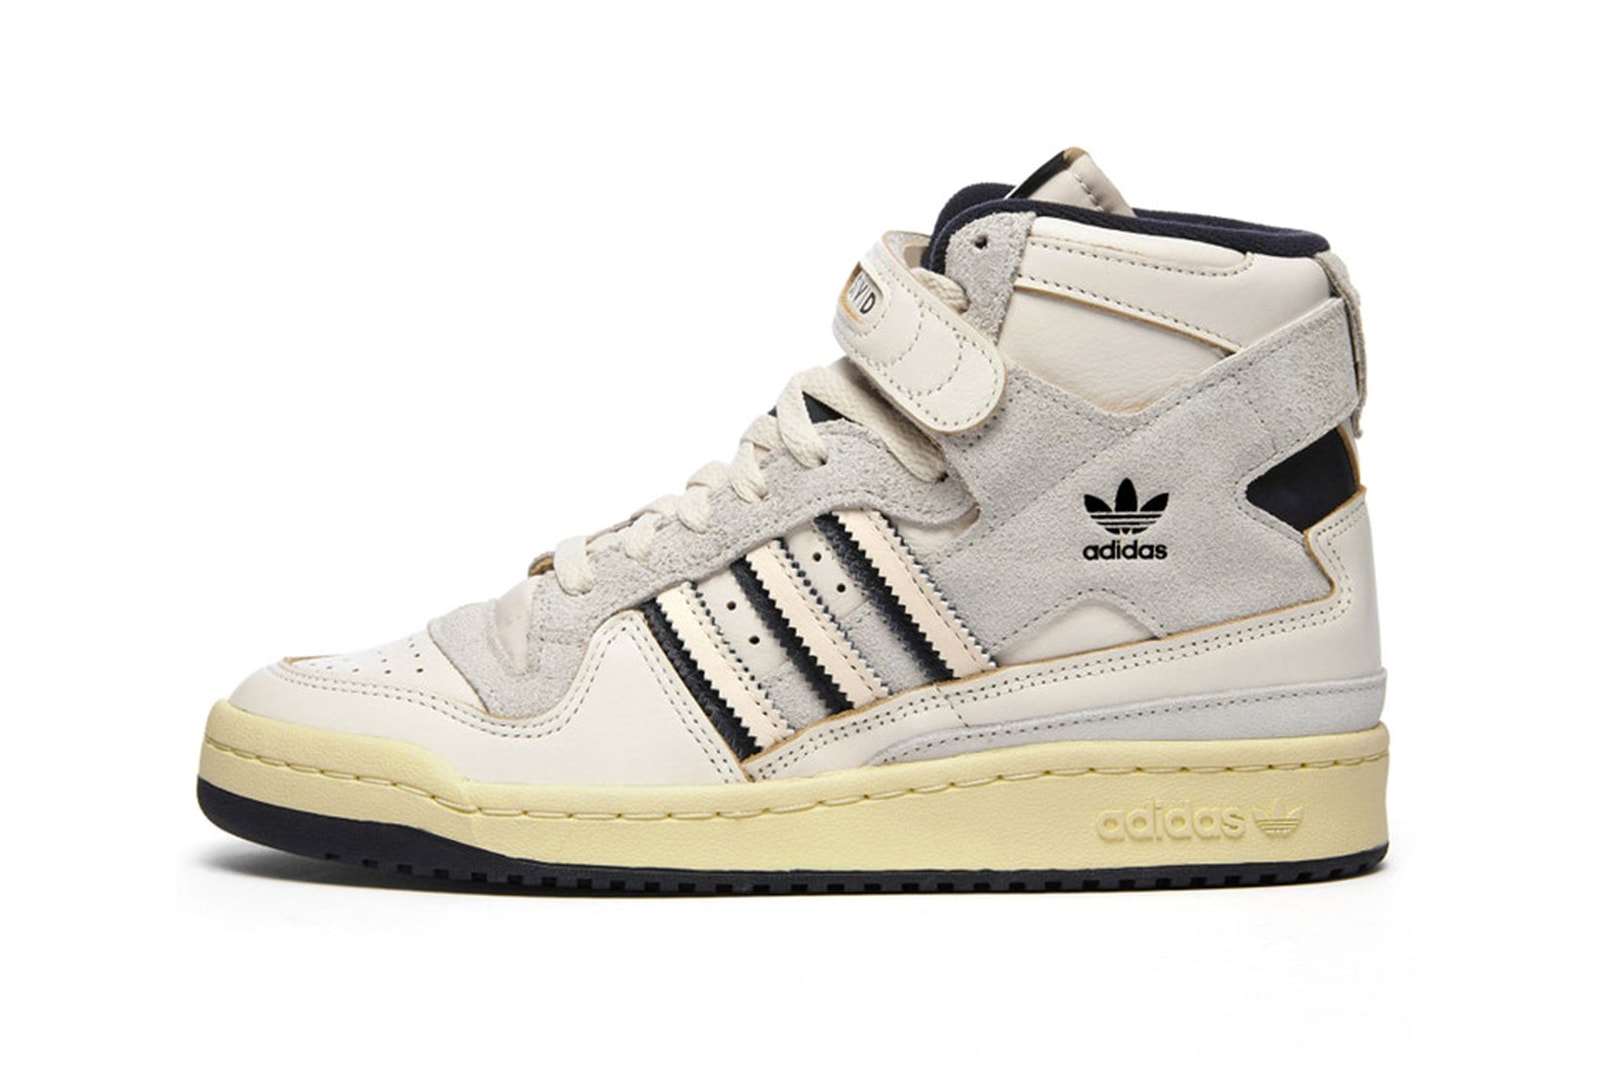 By Bowling extent adidas retro high sneakers saint Isaac policy